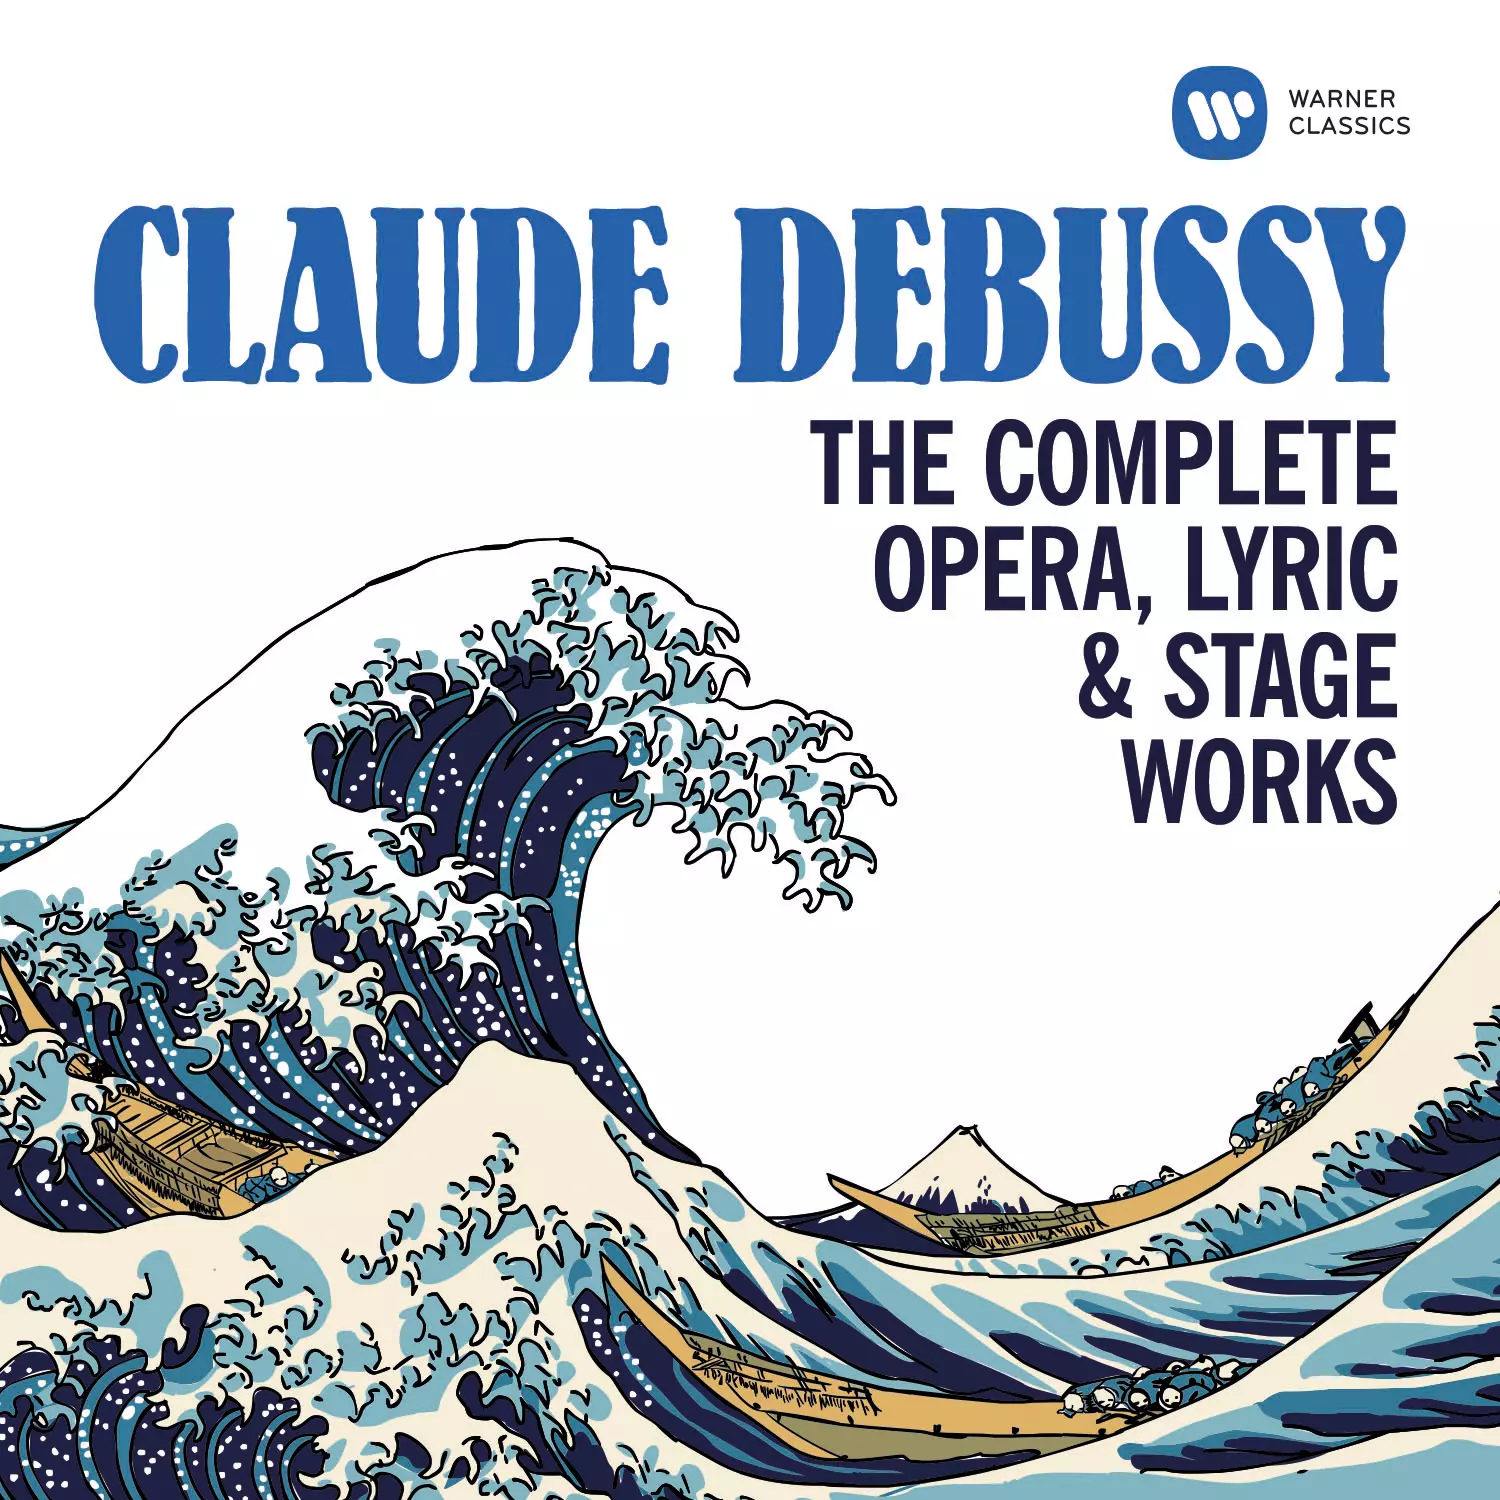 Debussy: The Complete Opera, Lyric & Stage Works